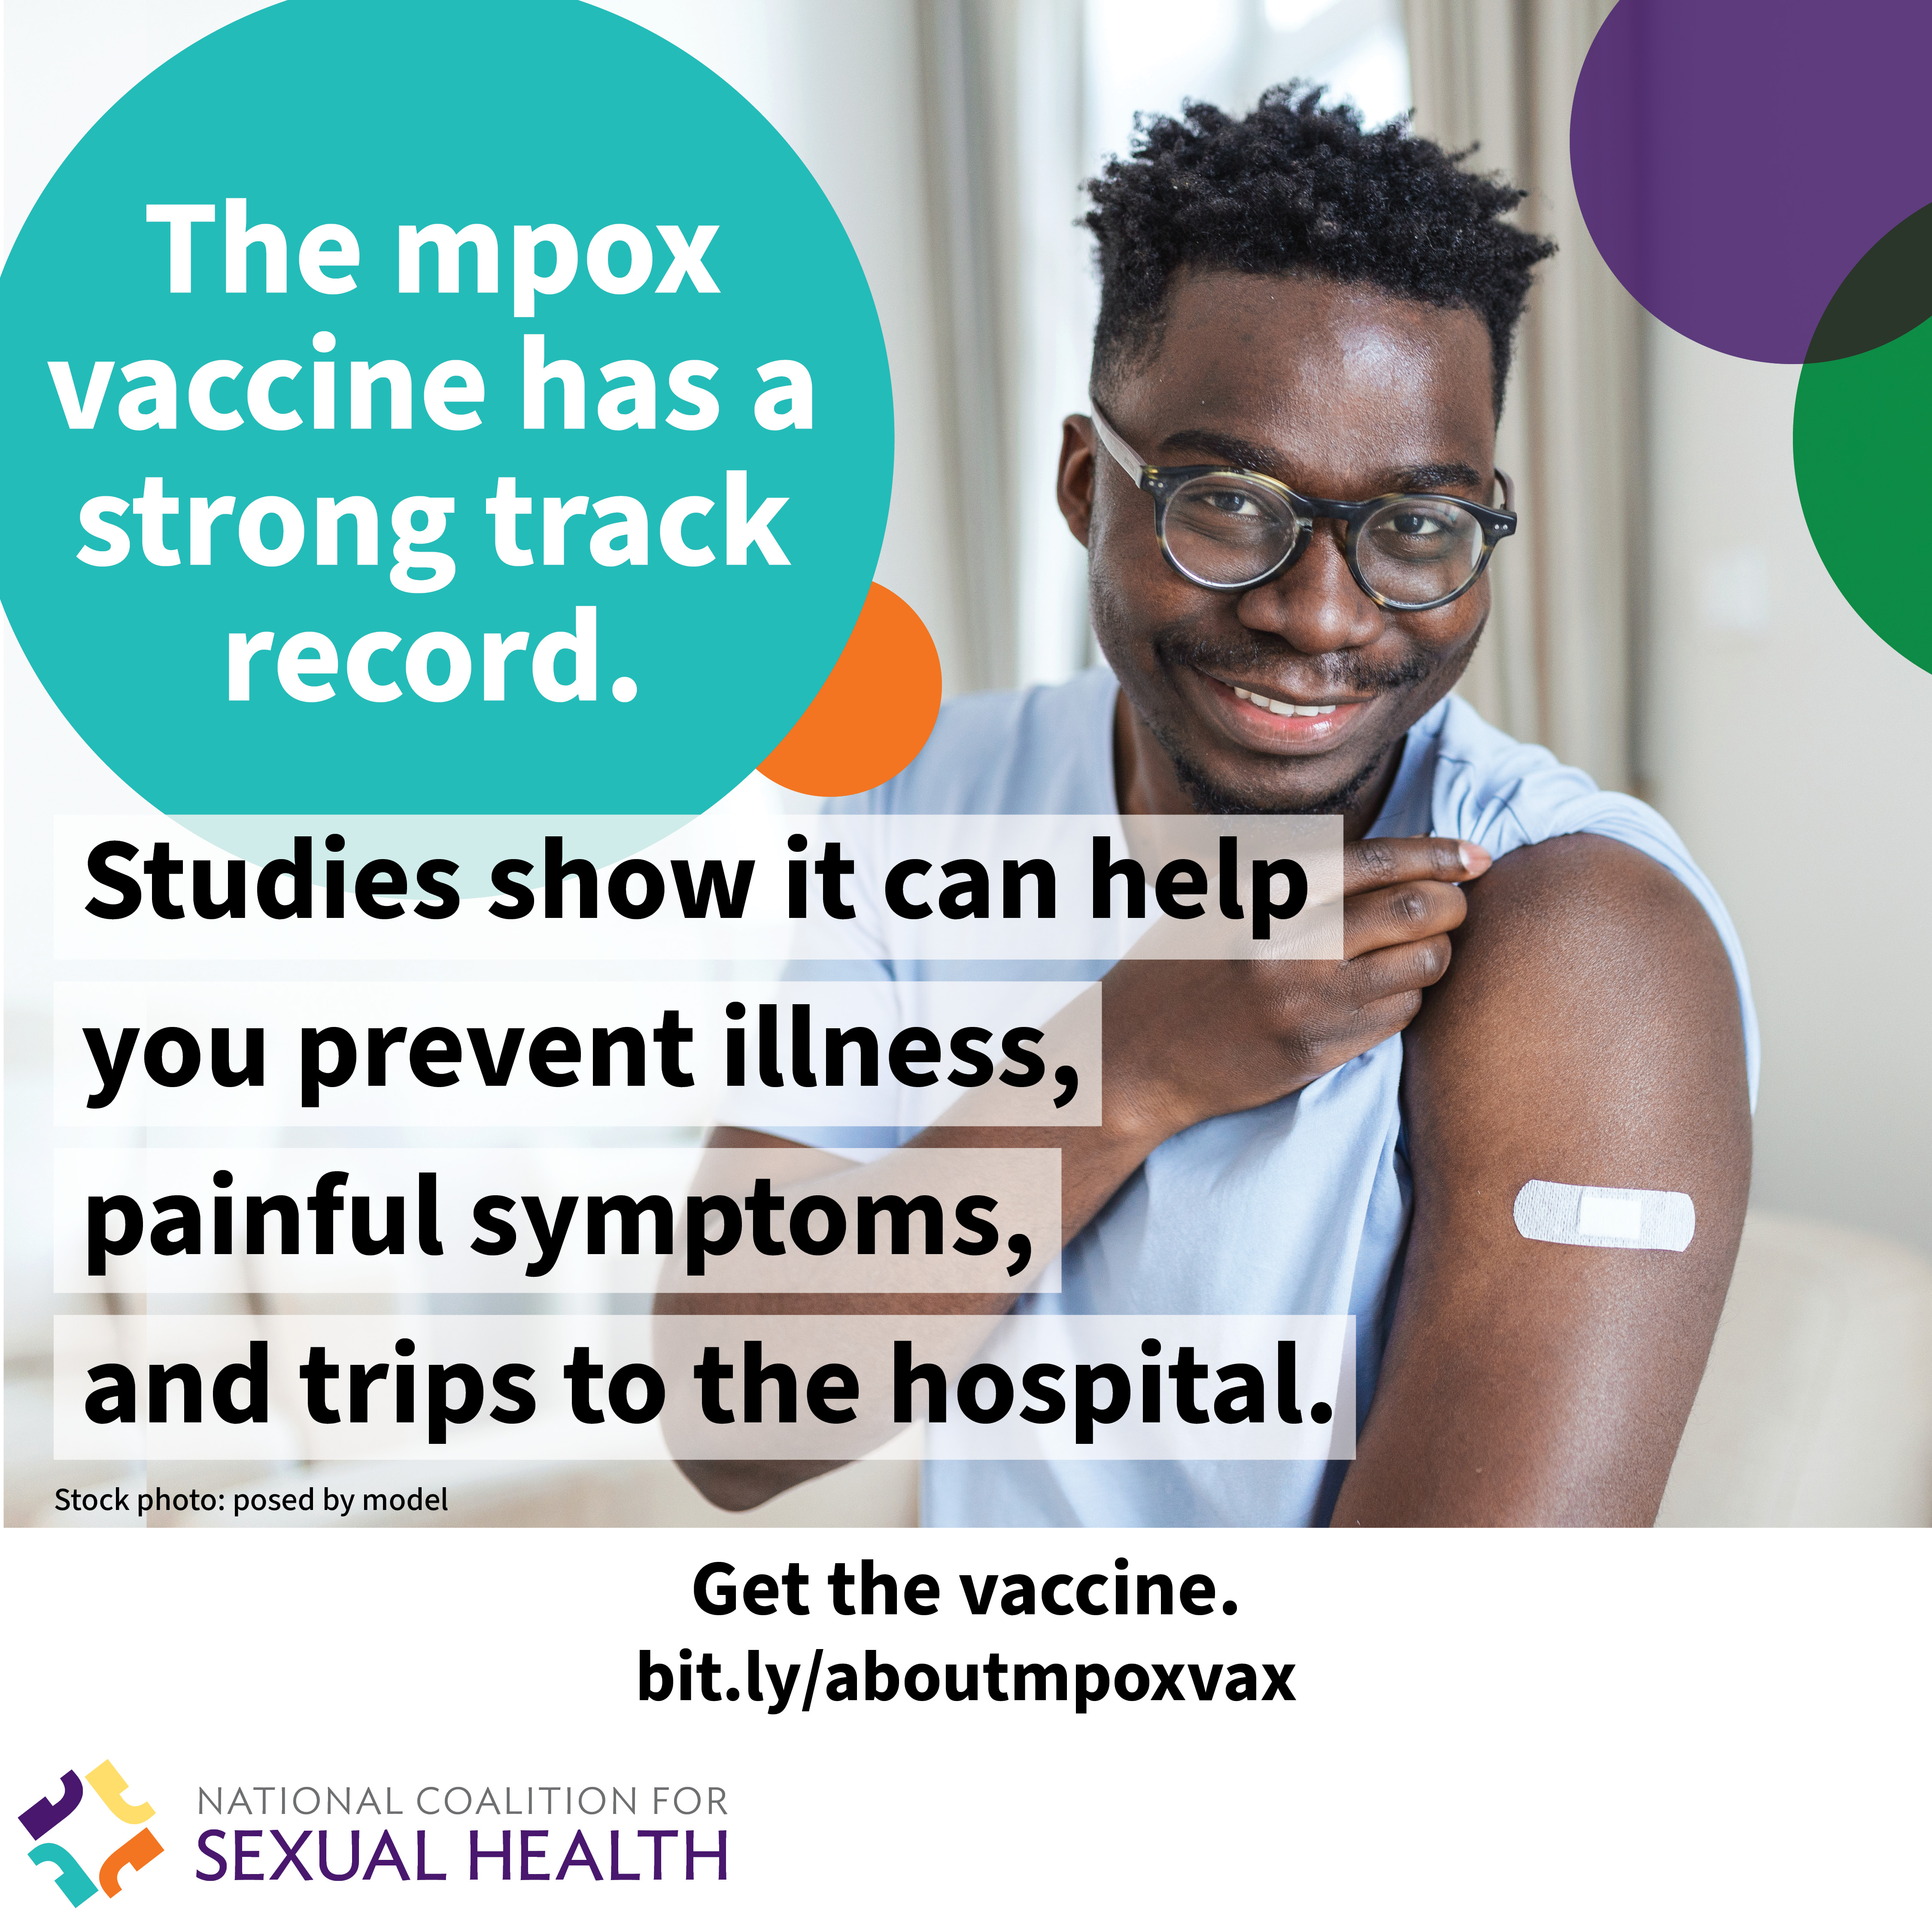 A young adult wearing a sleeveless white t-shirt smiles and reveals a bandage on their upper arm with the sleeve of their over shirt pulled down. Text: The mpox vaccine has a strong track record. Studies show it can help you prevent illness, painful symptoms, and trips to the hospital. Start the vaccine now. bit.ly/aboutmpoxvax. Logo:  National Coalition for Sexual Health.